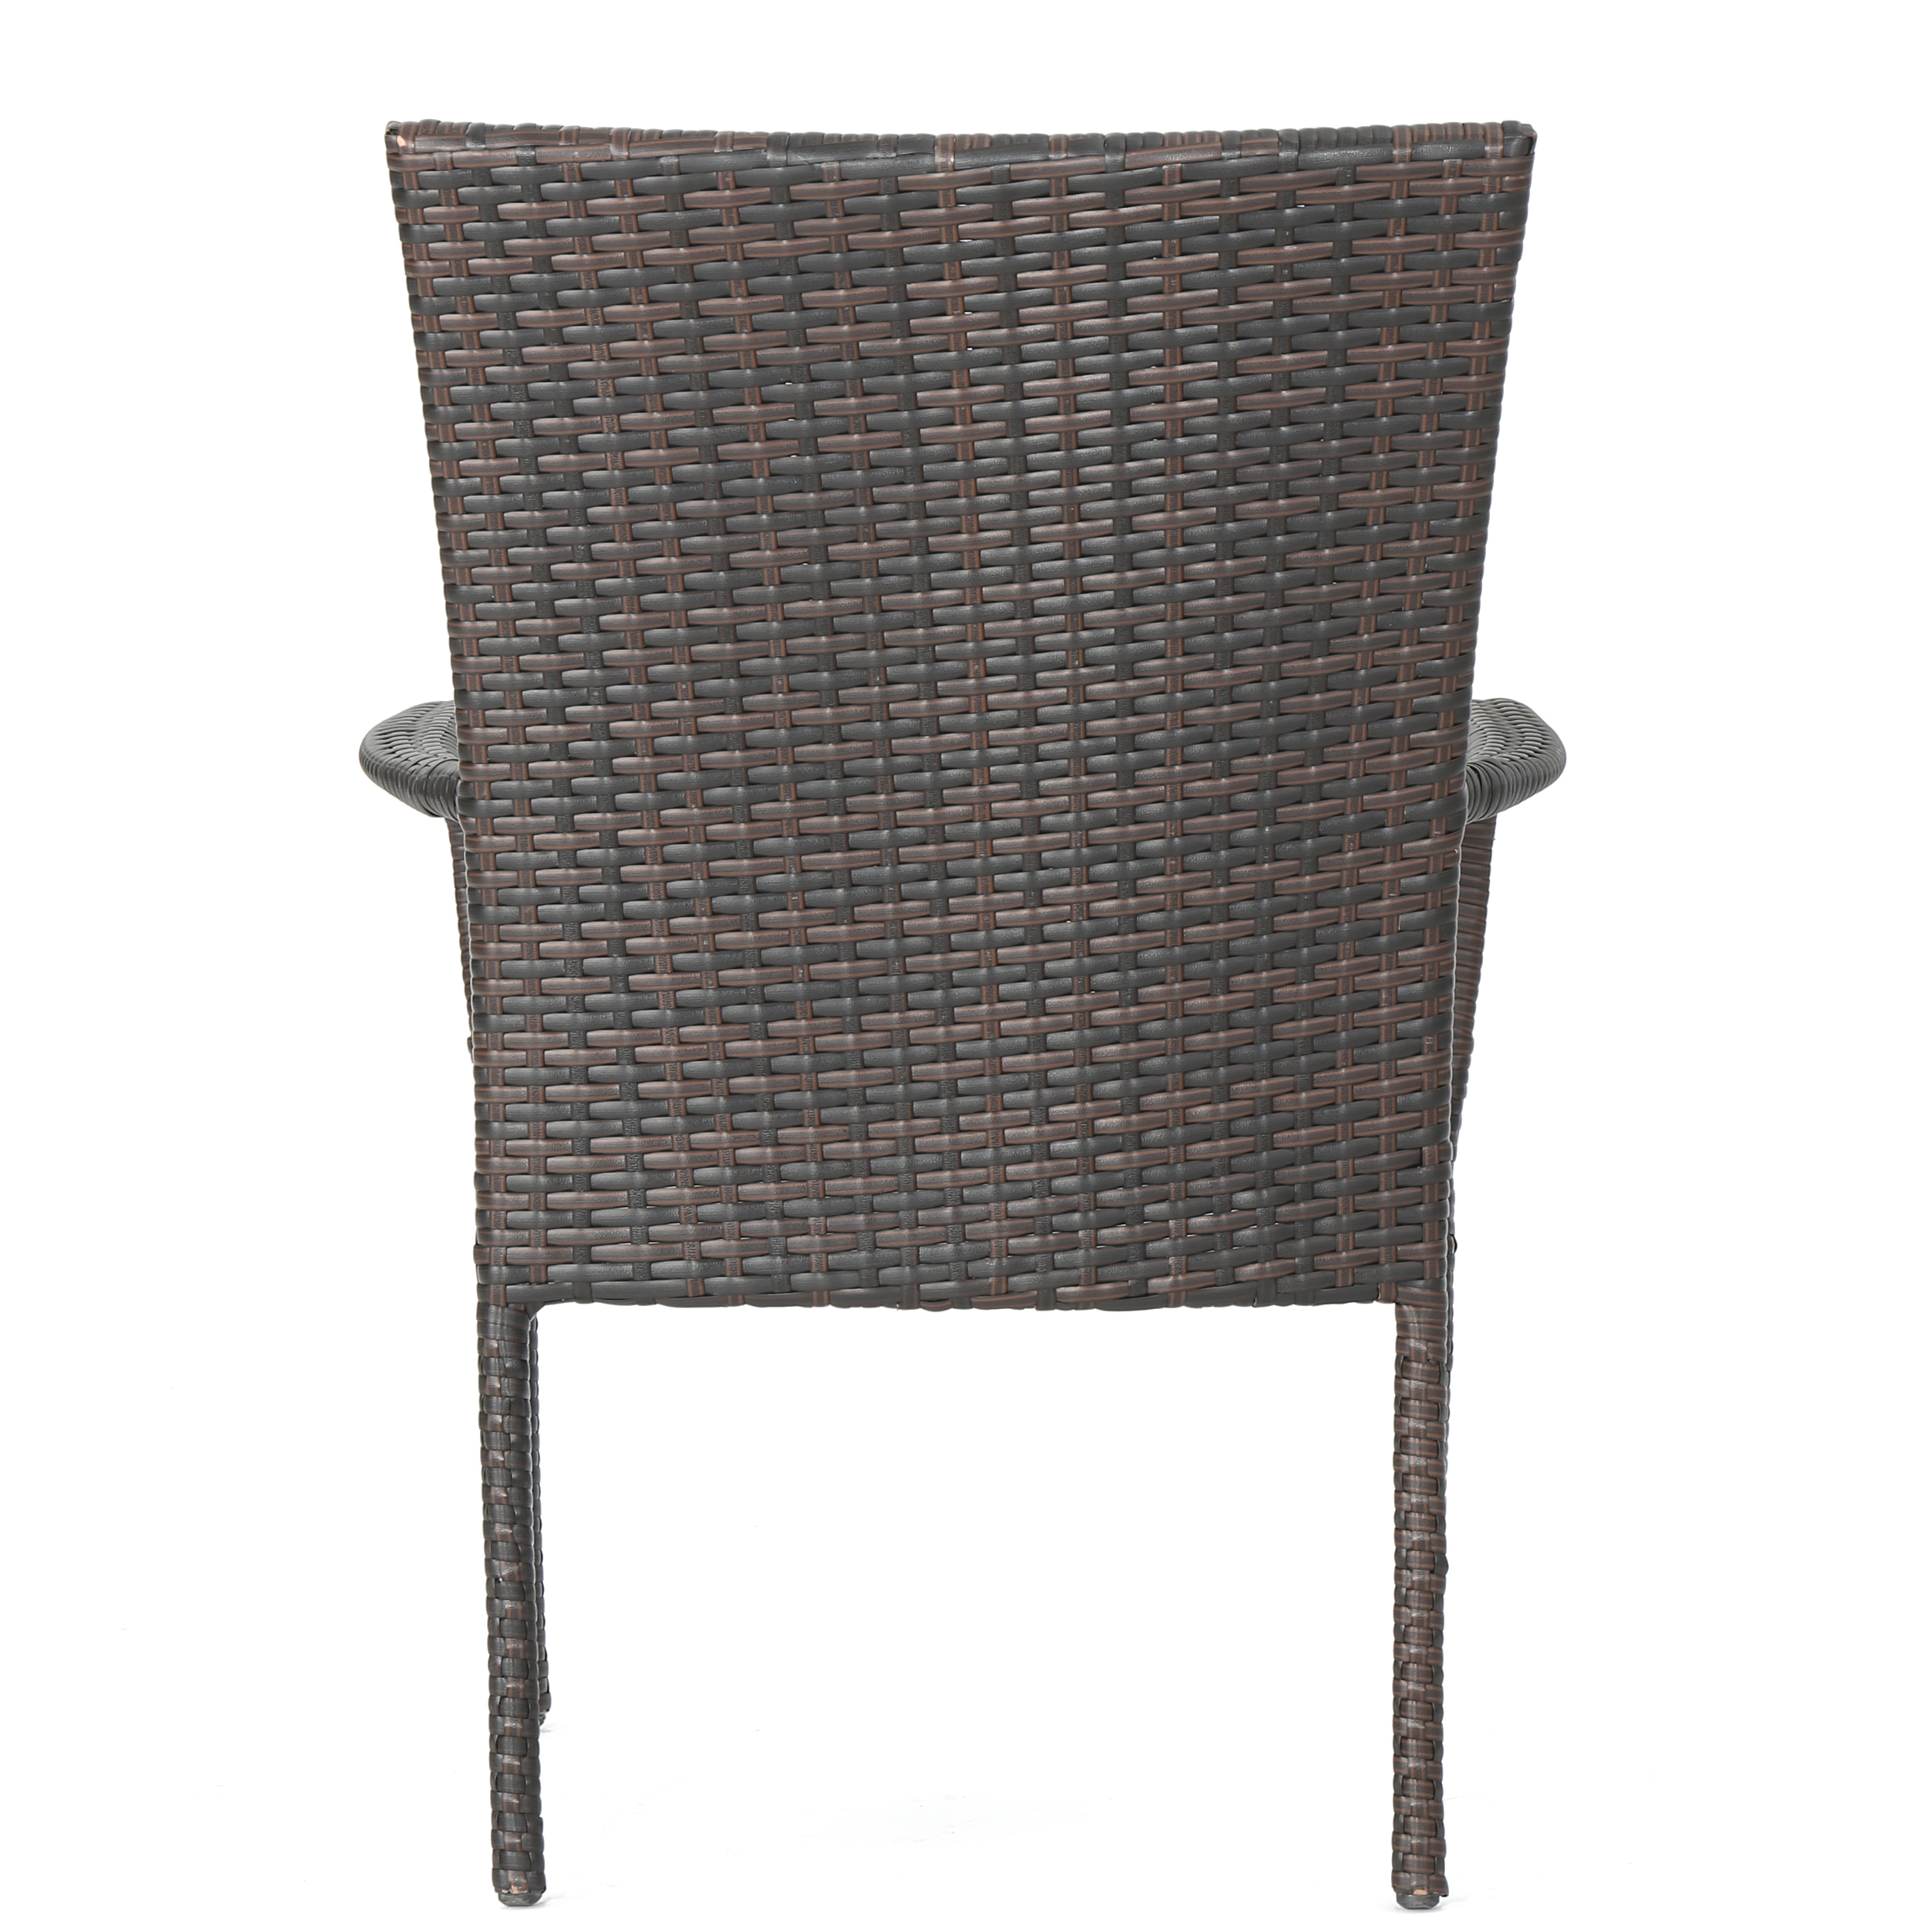 Cascada Outdoor 3 Piece Wicker Chat Set with Straight Back Chair, Multibrown - image 5 of 8